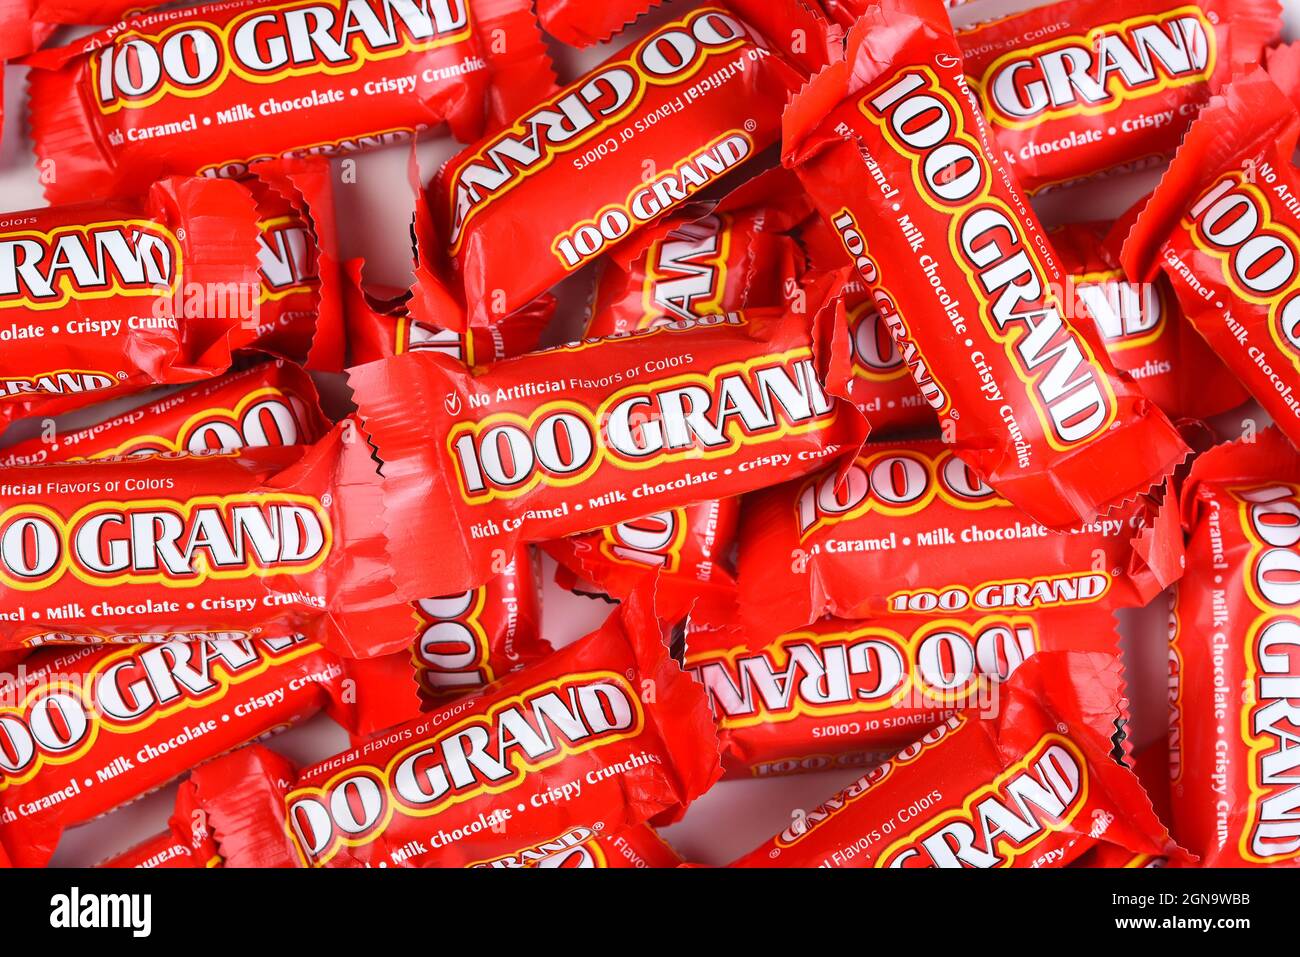 IRVINE, CALIFORNIA - 23 SEPT 2021: A large pile of 100 Grand Fun Size Candy Bars for Halloween. Stock Photo